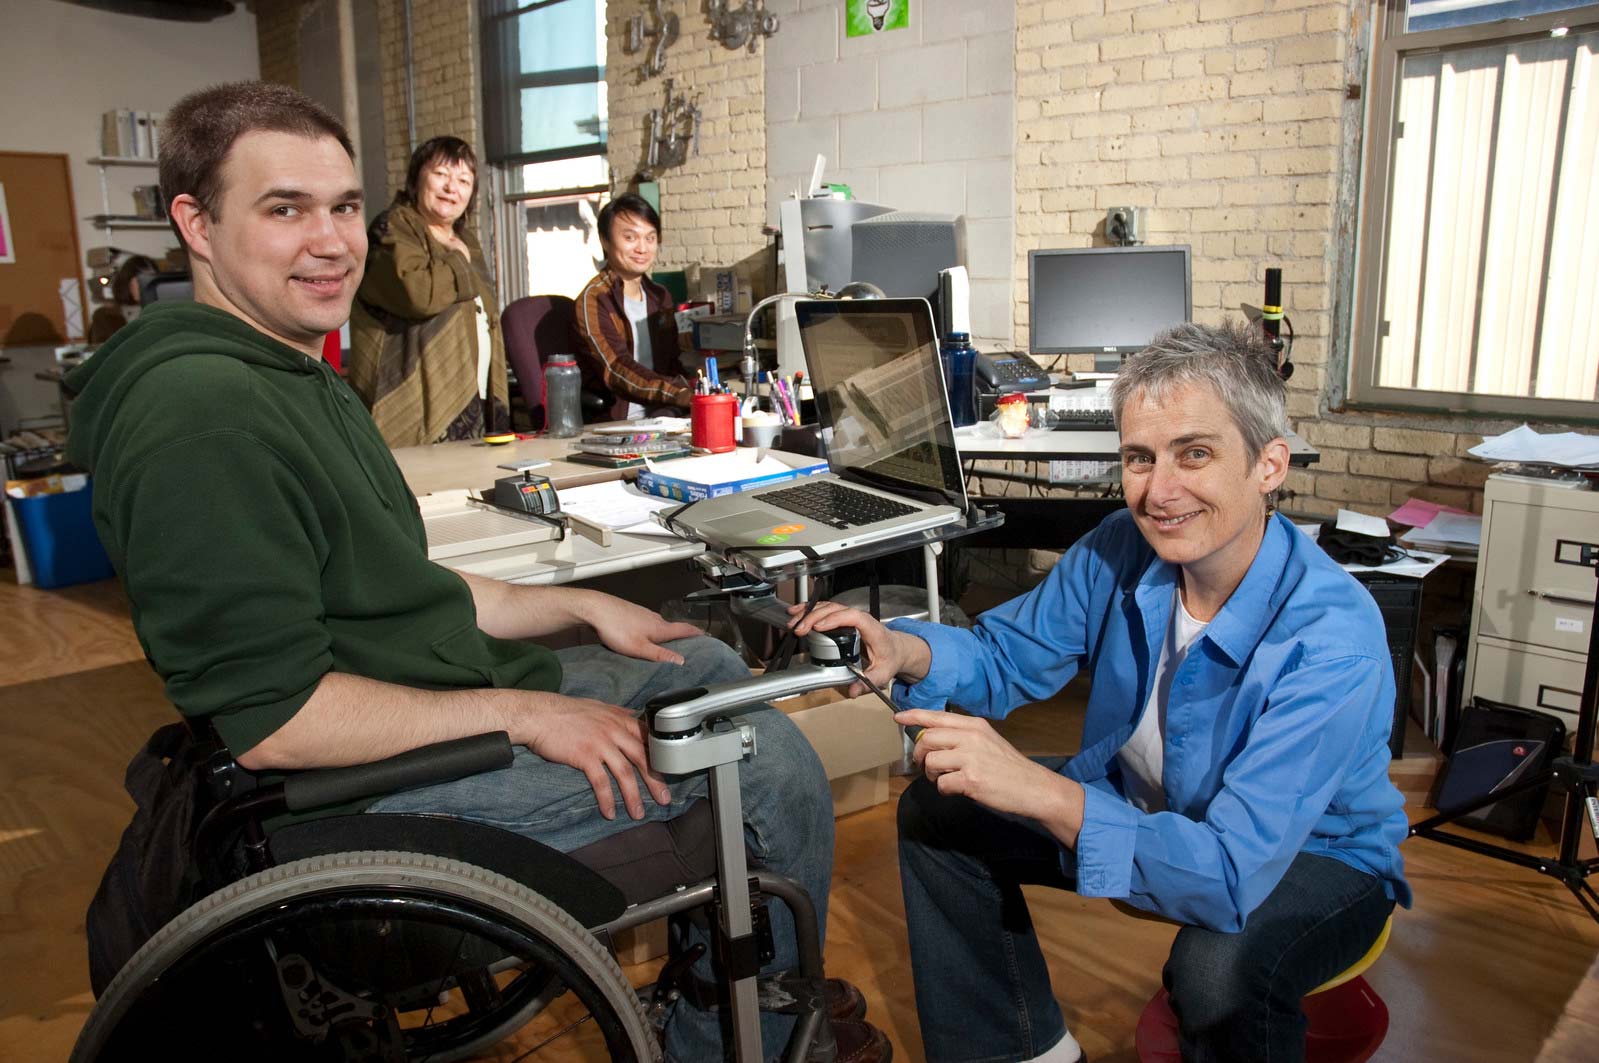 Blue Sky Designs founder Dianne Goodwin and Production Manager Peter Bohl showcase the Mount'n Mover, an attachment arm for wheelchairs that allows items to be connected "hands-free."